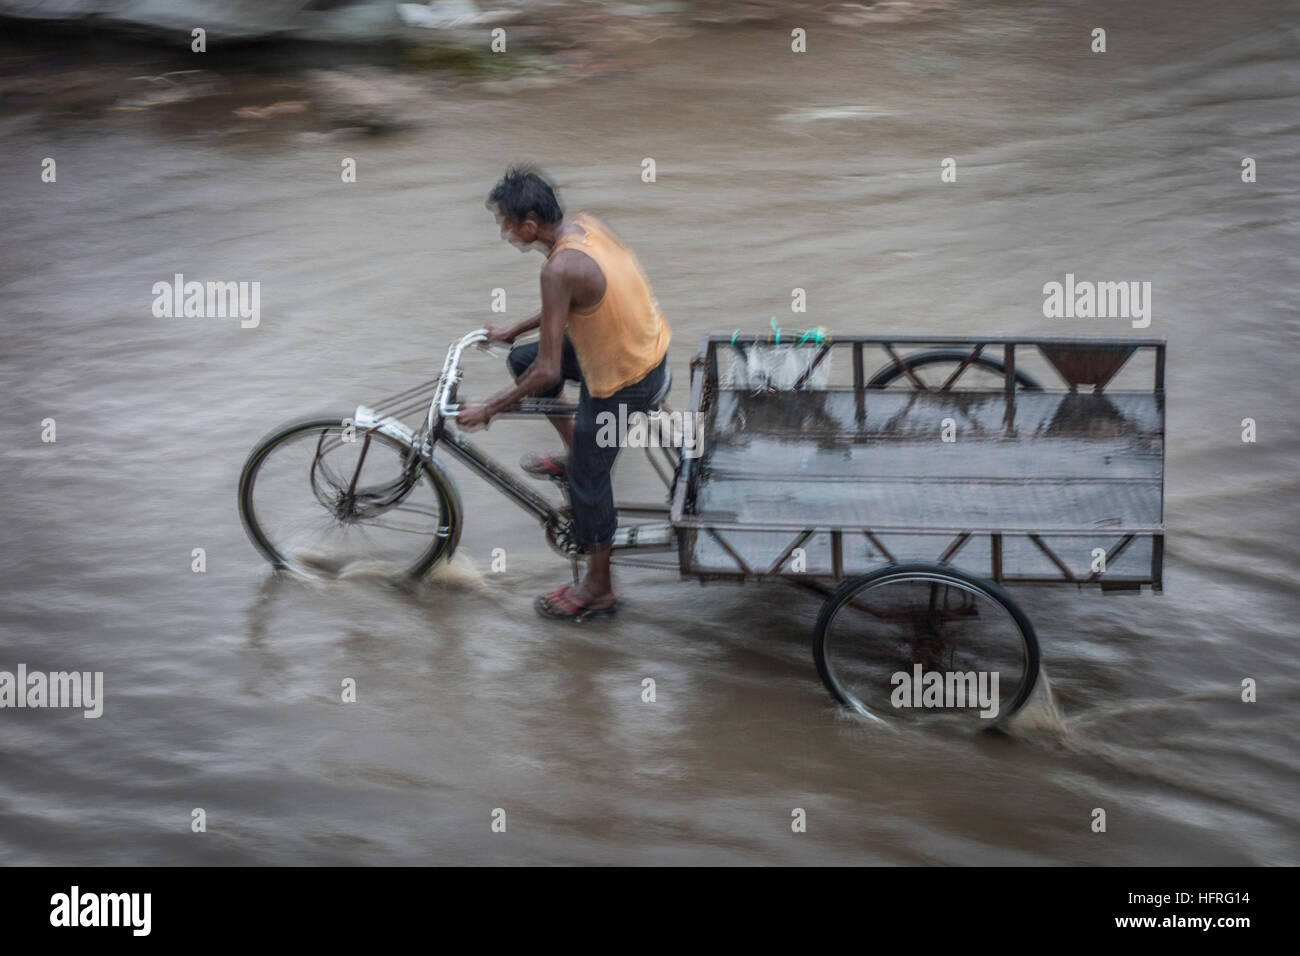 Cyclist fording flooded streets. Jaipur, India. Stock Photo